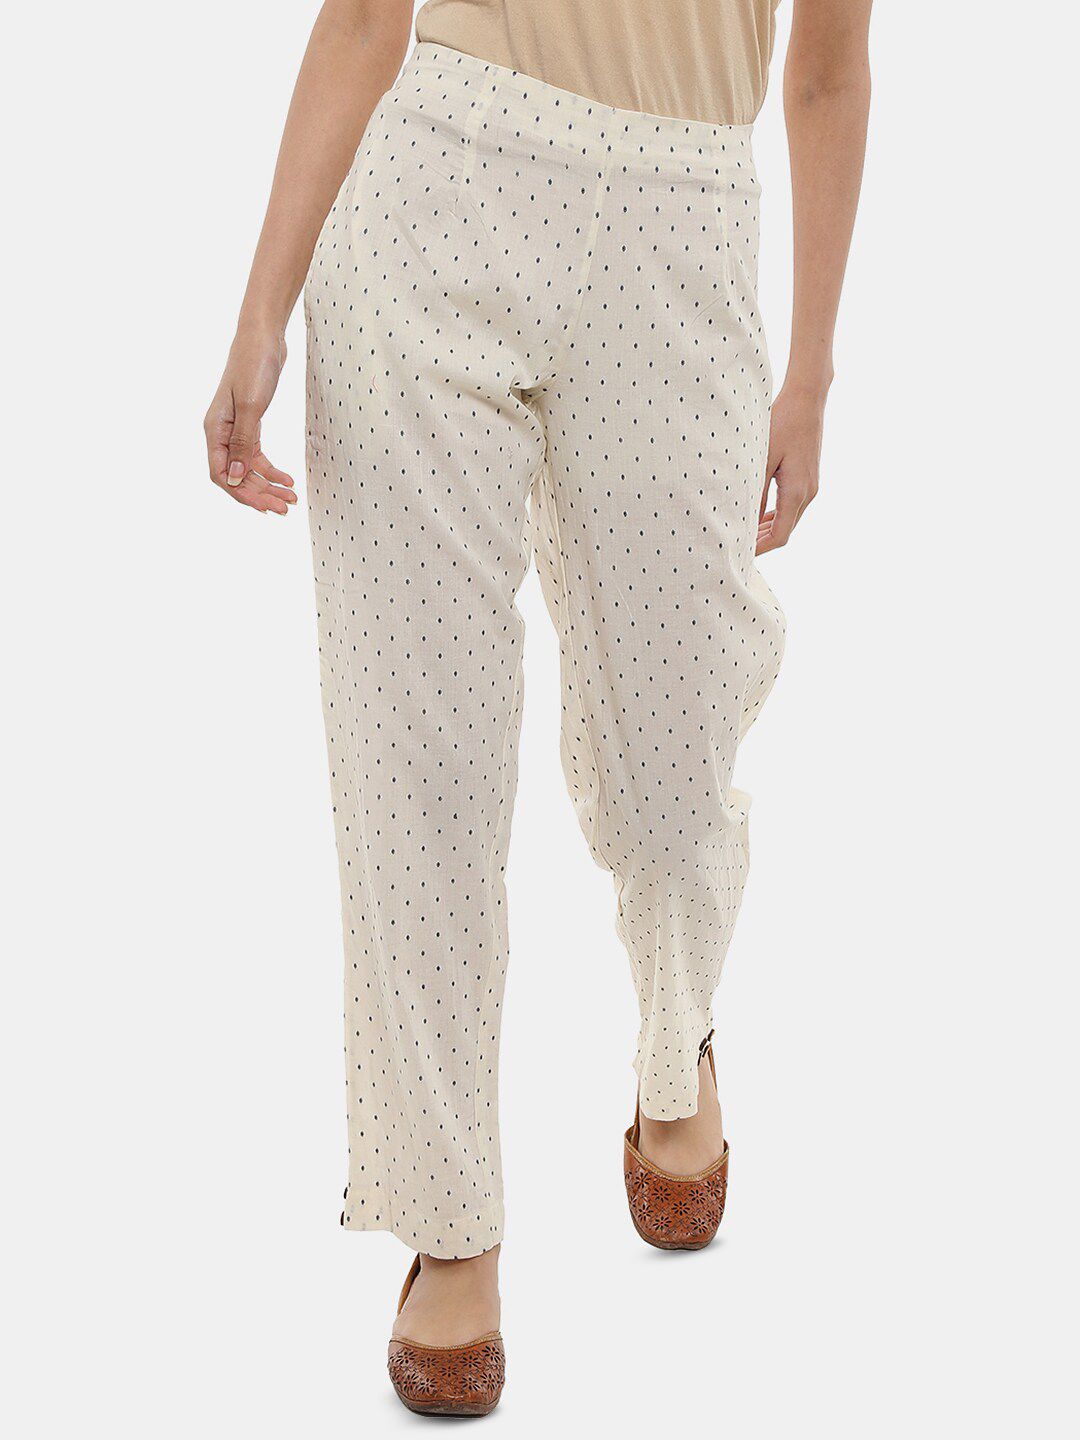 V-Mart Women Conversational Printed Plain Cotton Trousers Price in India